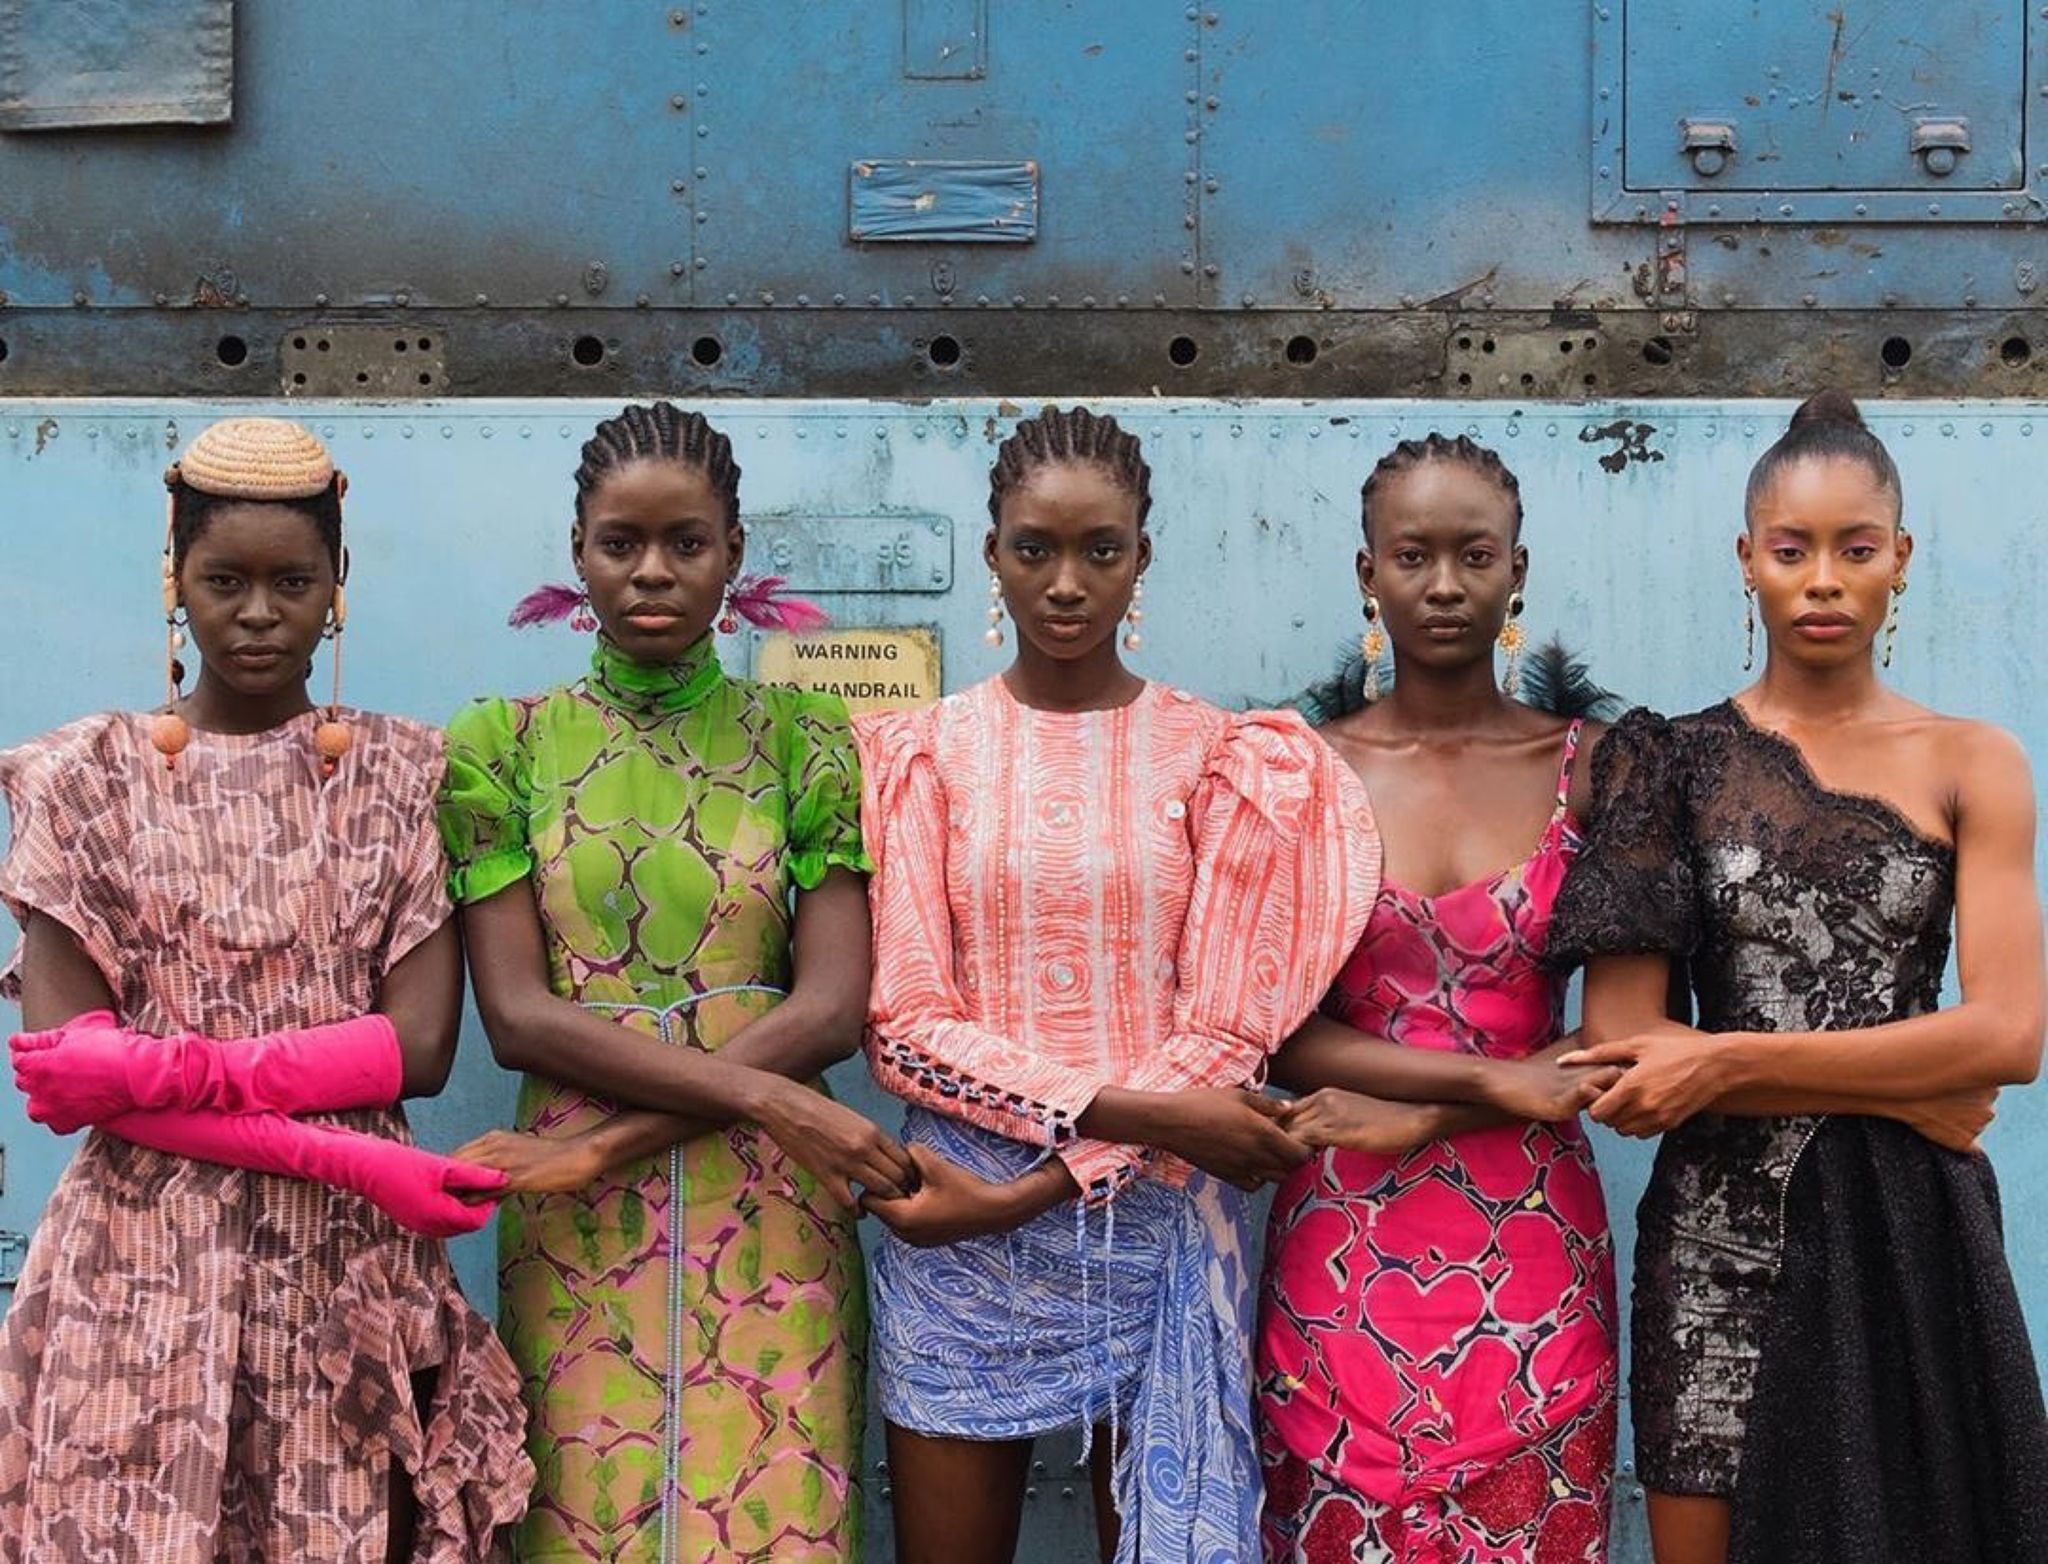 The V&A’s Latest Exhibition Is An Unbridled Celebration Of African Culture